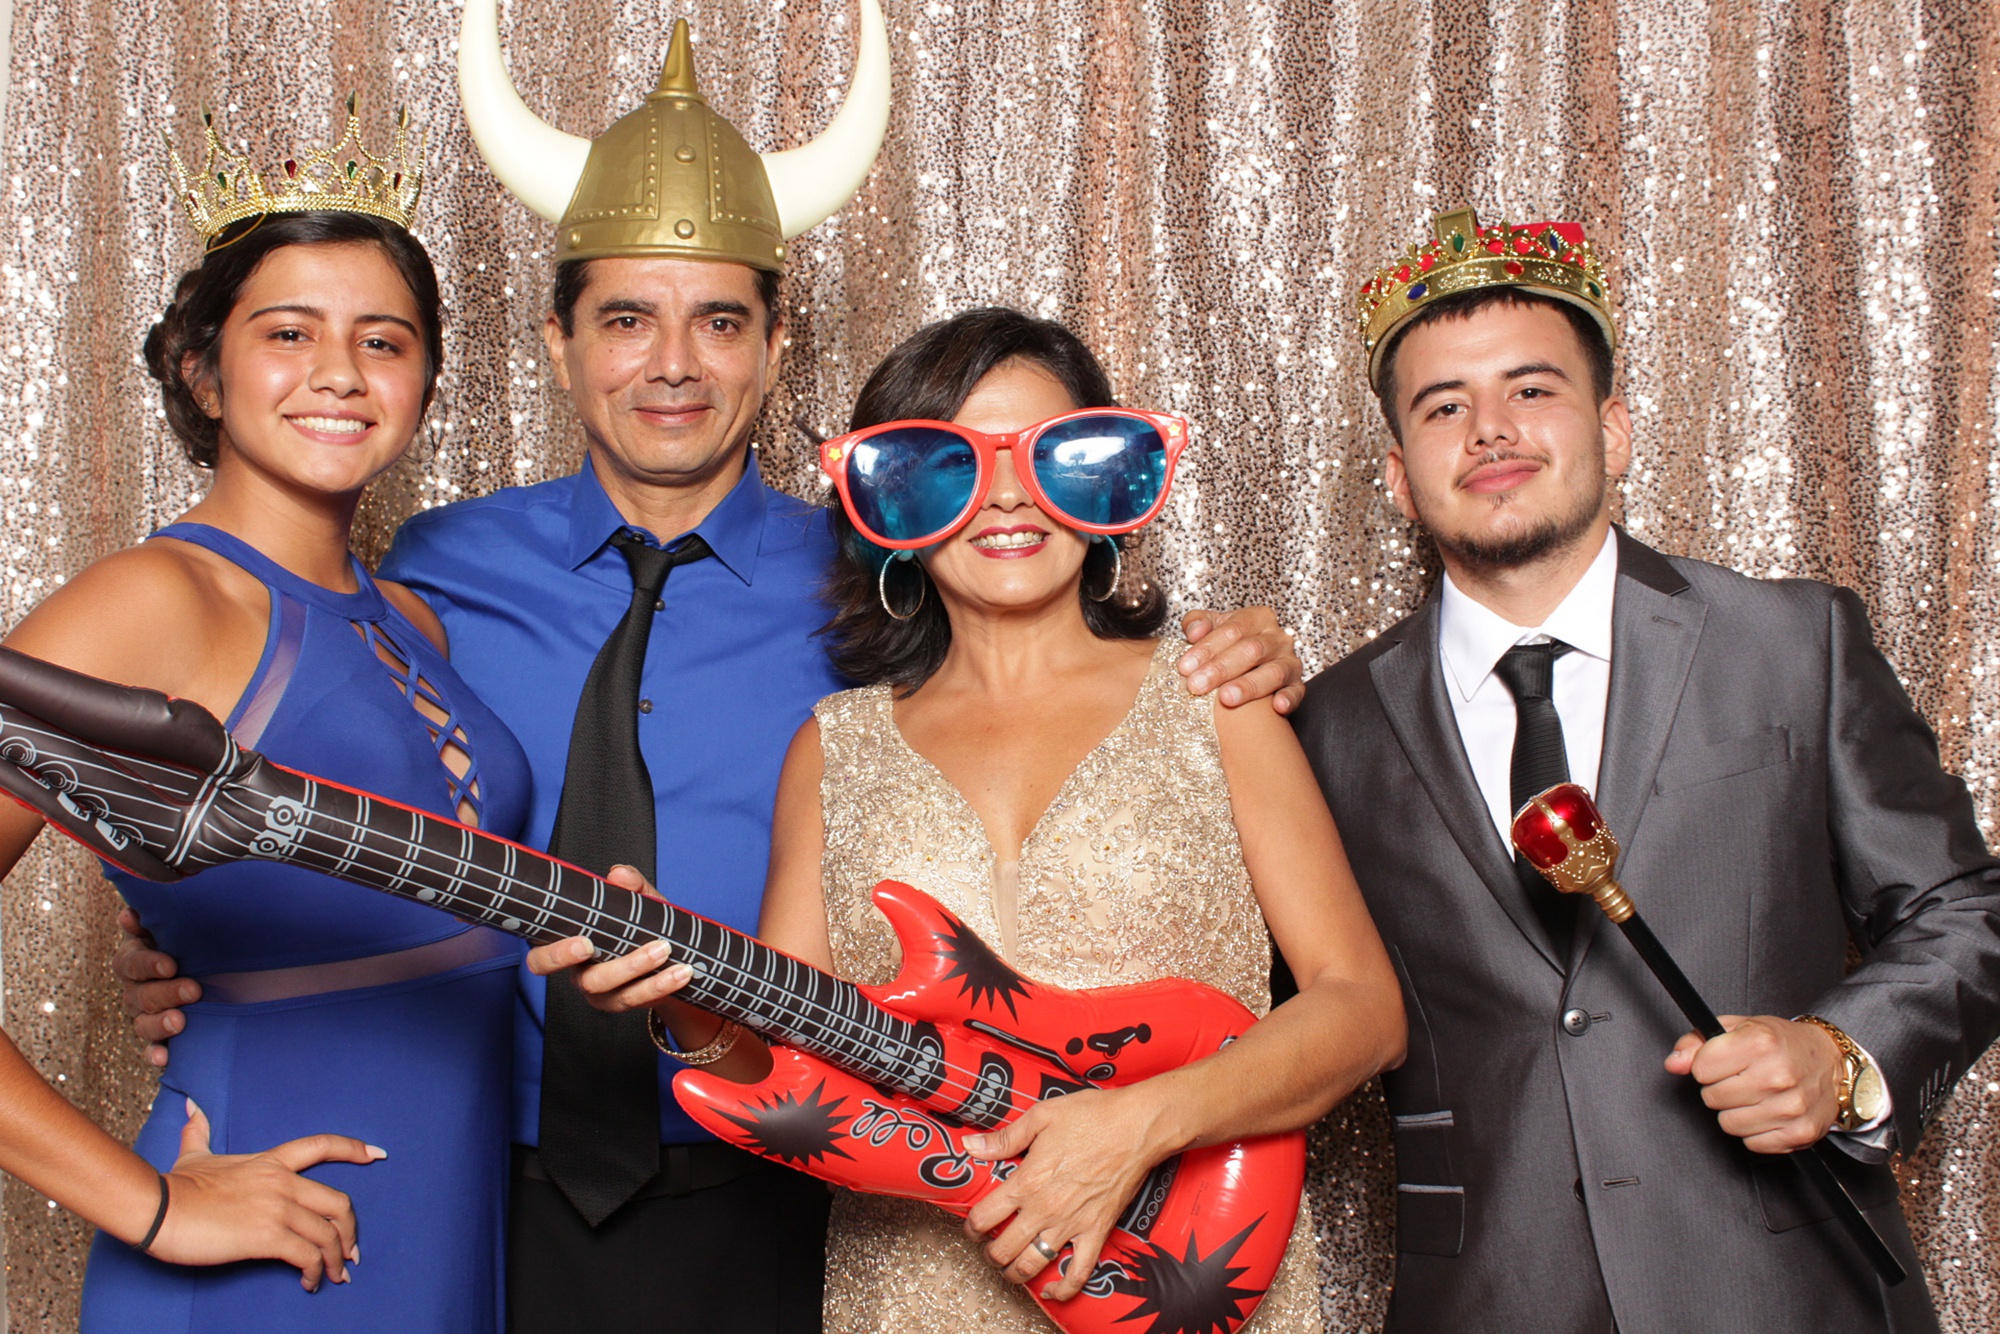 guests pose with fun props in Idalia Photography's photo booth